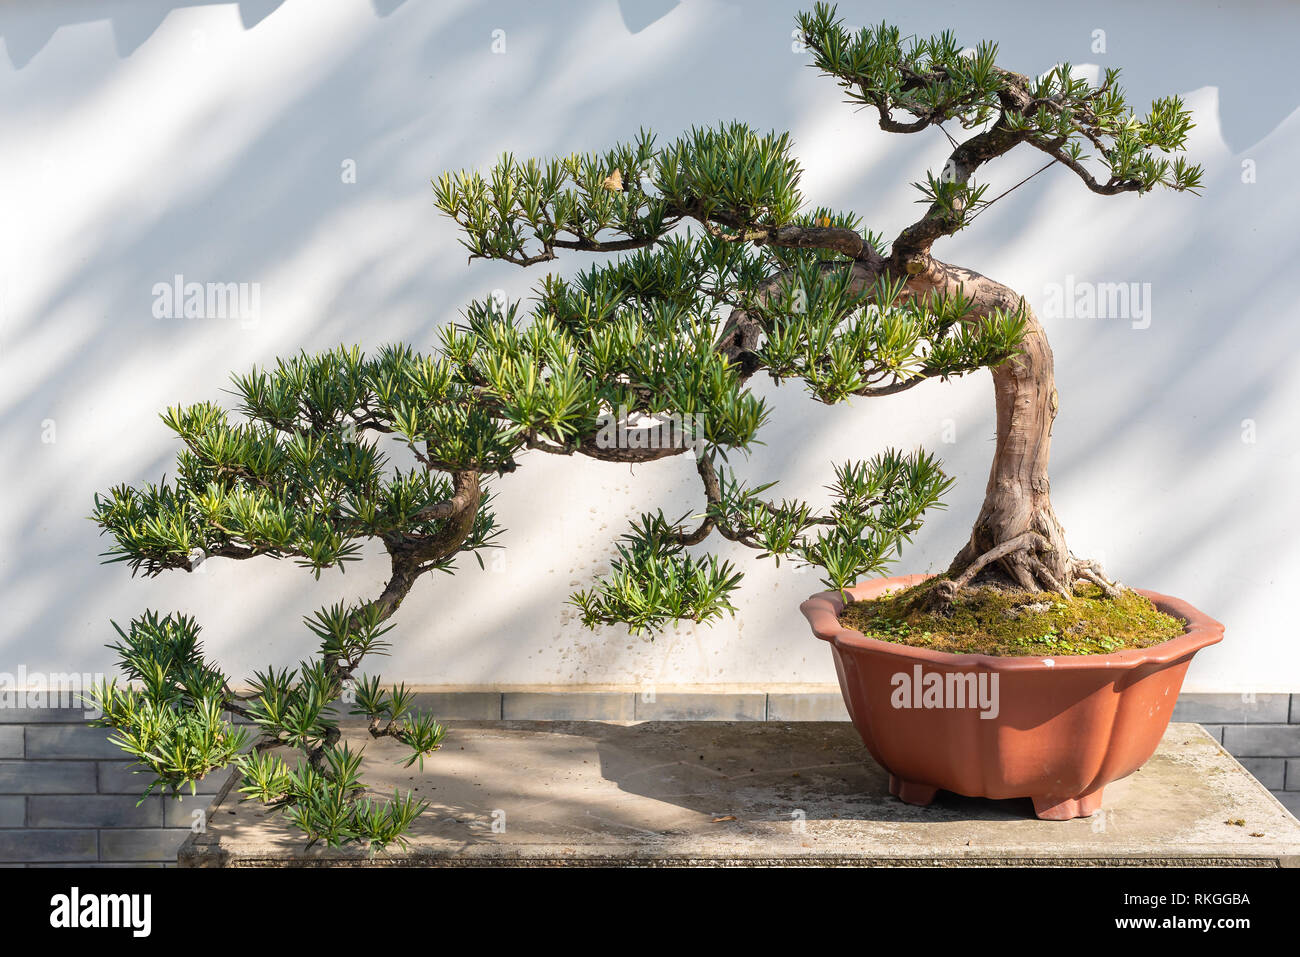 Twisted pine bonsai tree on a wooden table against white wall in Baihuatan public park, Chengdu, Sichuan province, China Stock Photo